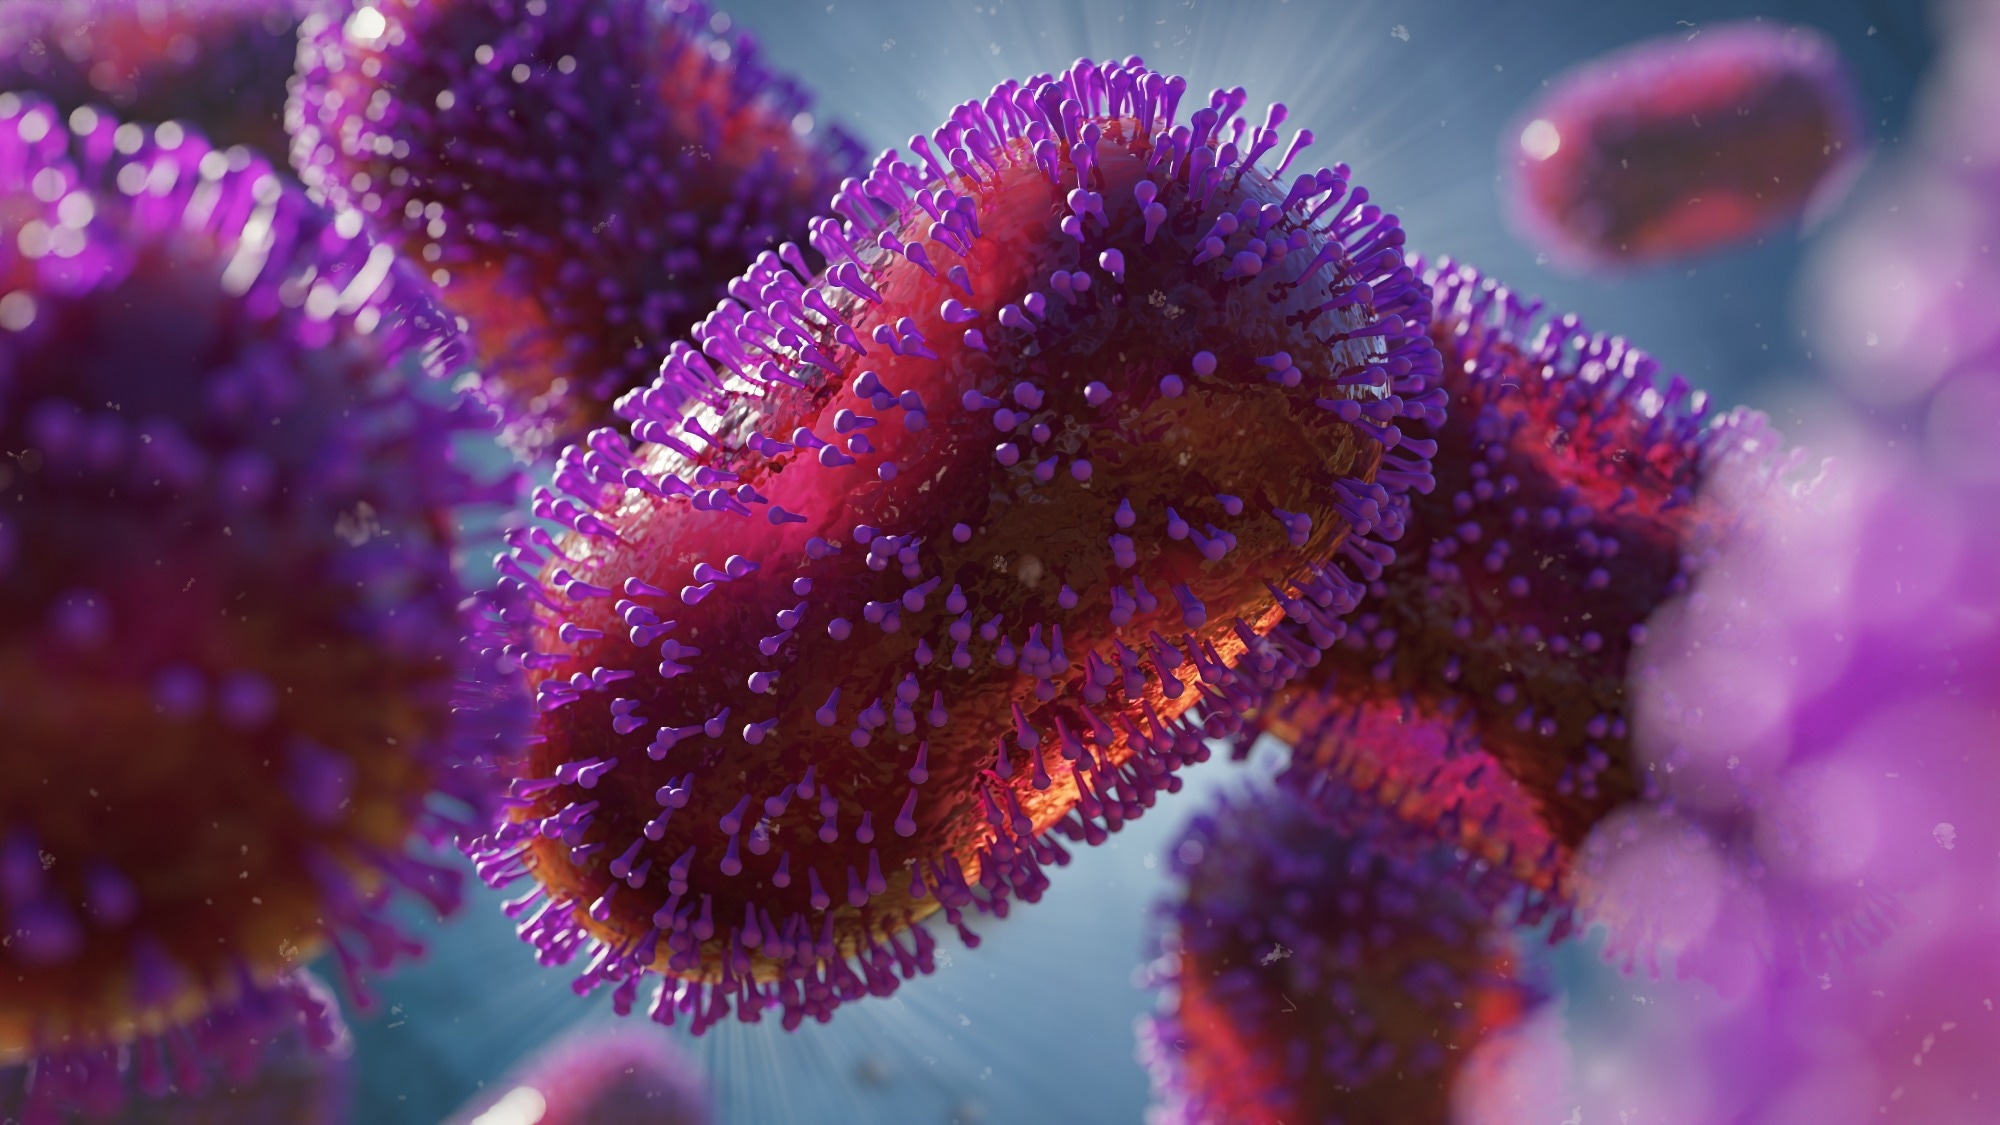 Study: Heat inactivation of the Monkeypoxvirus. Image Credit: Dotted Yeti/Shutterstock